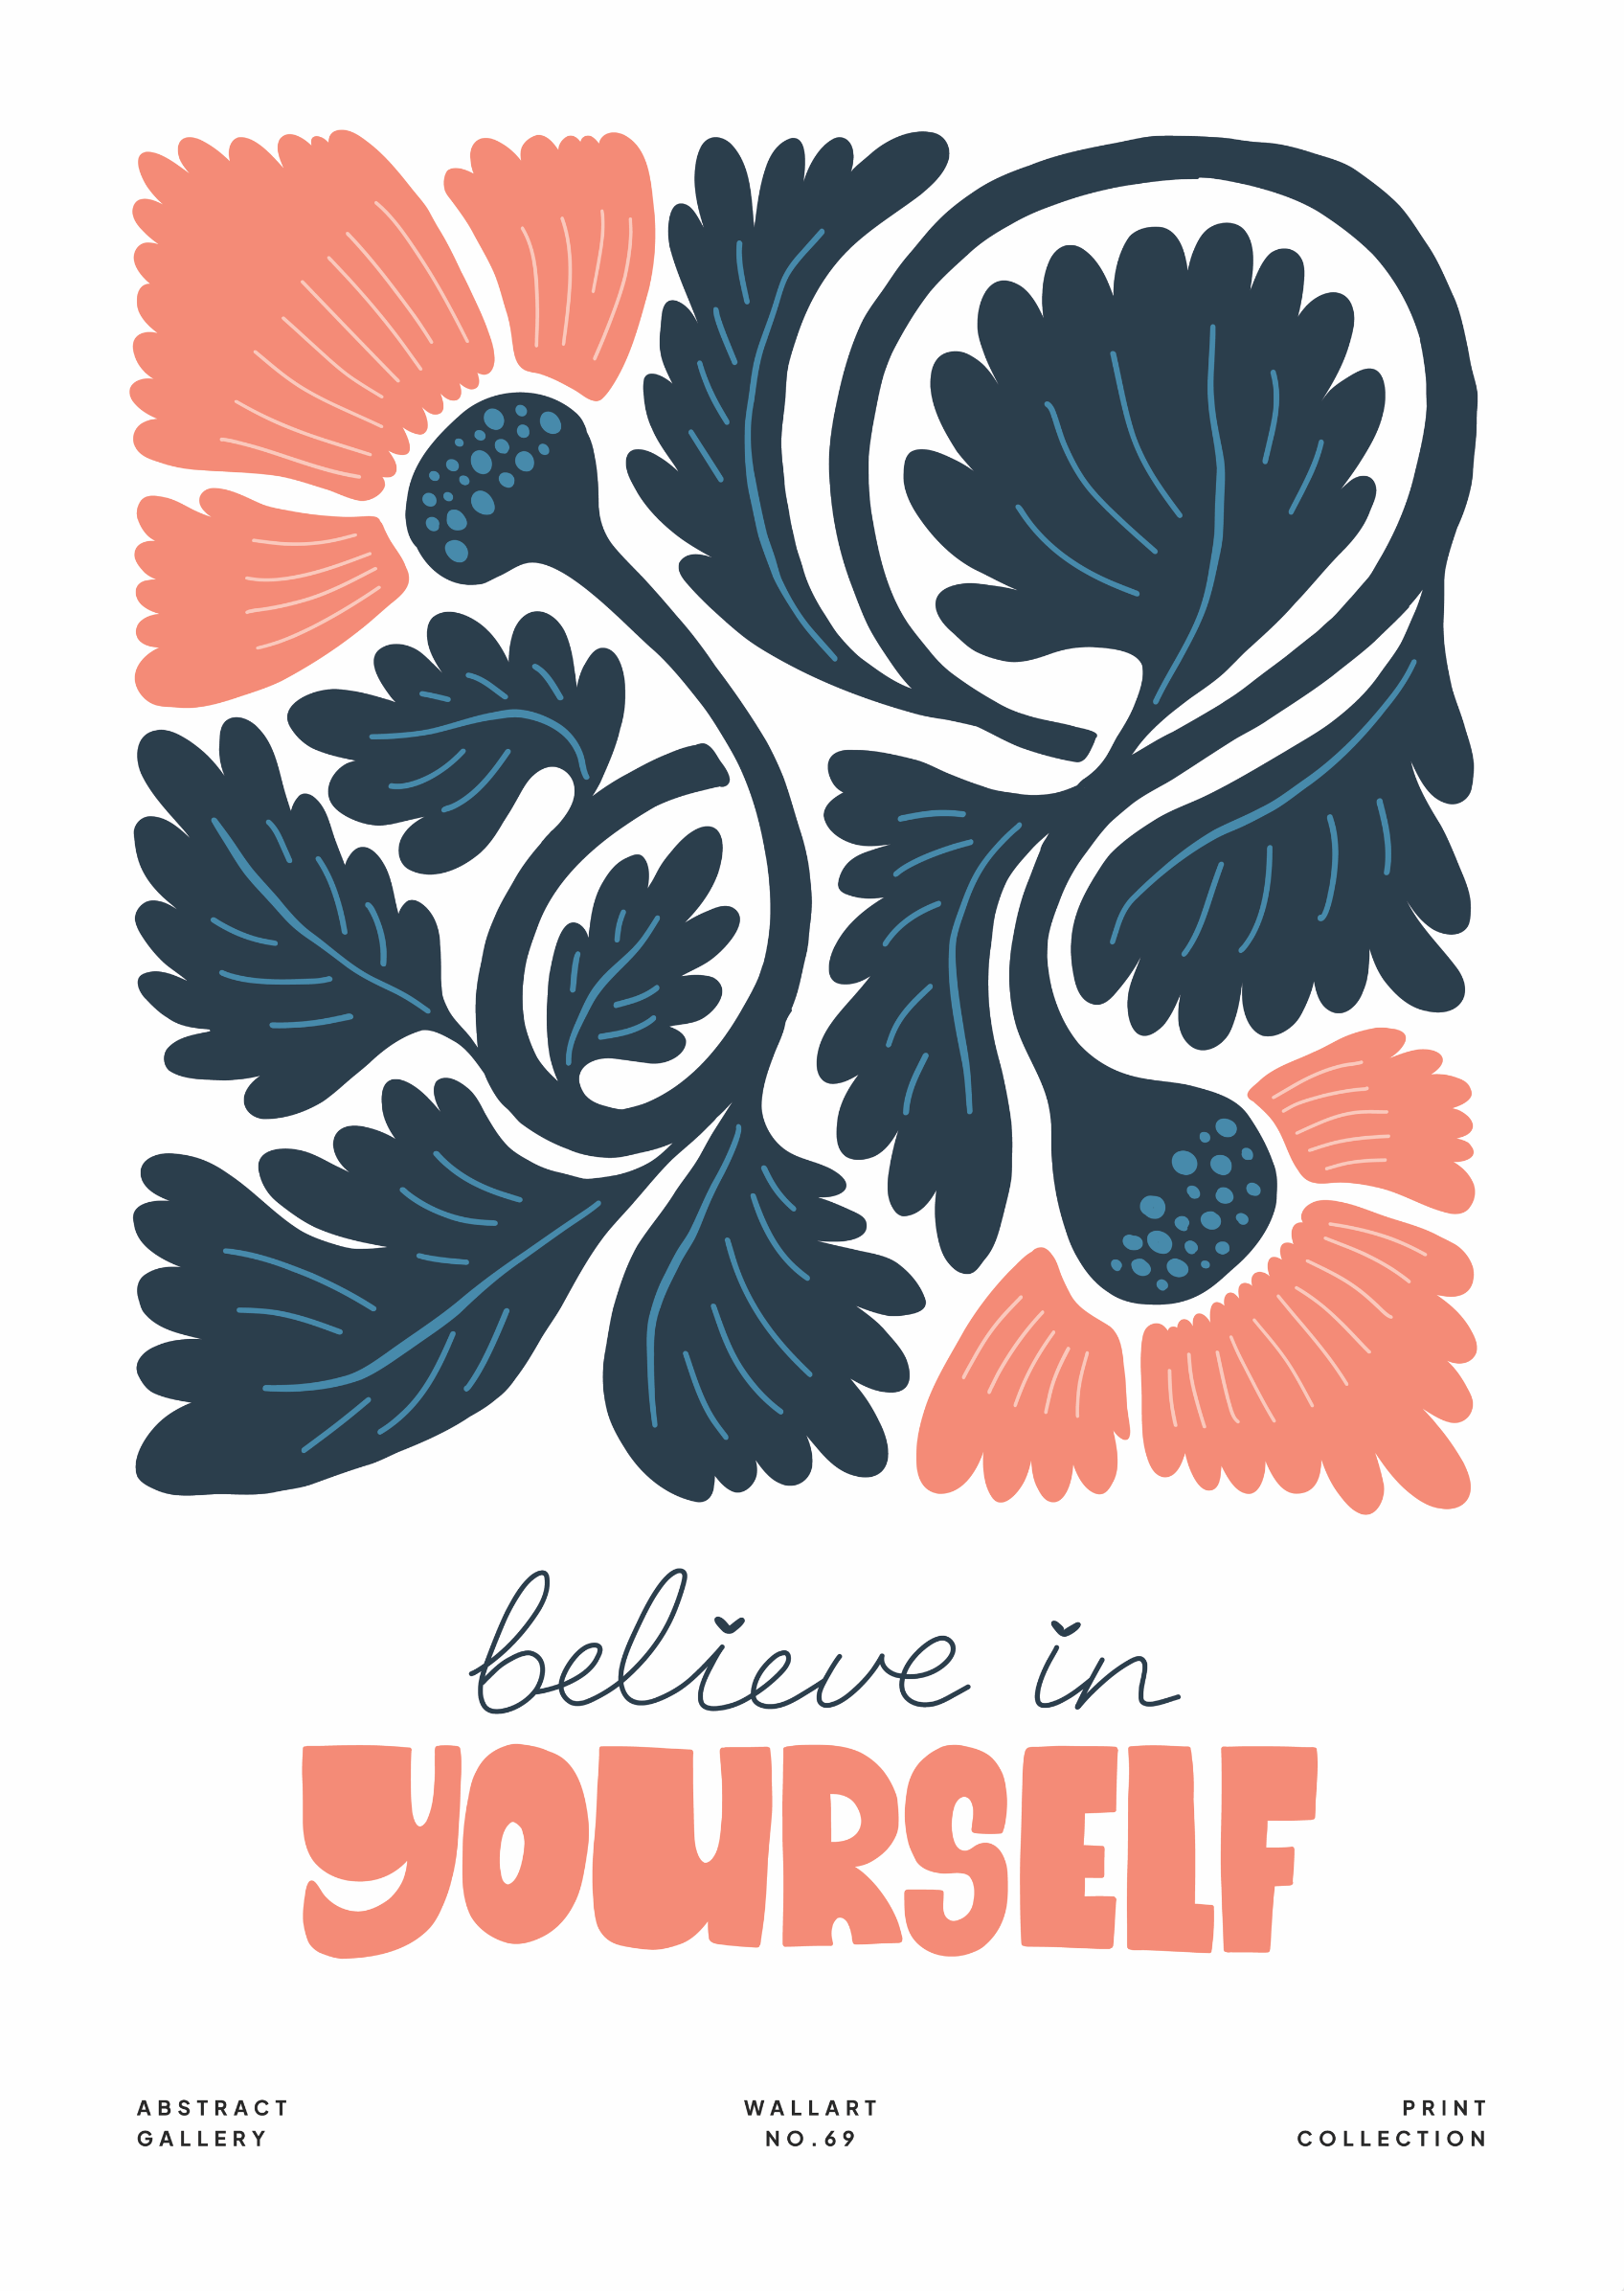 Abstract Gallery - Believe in yourself